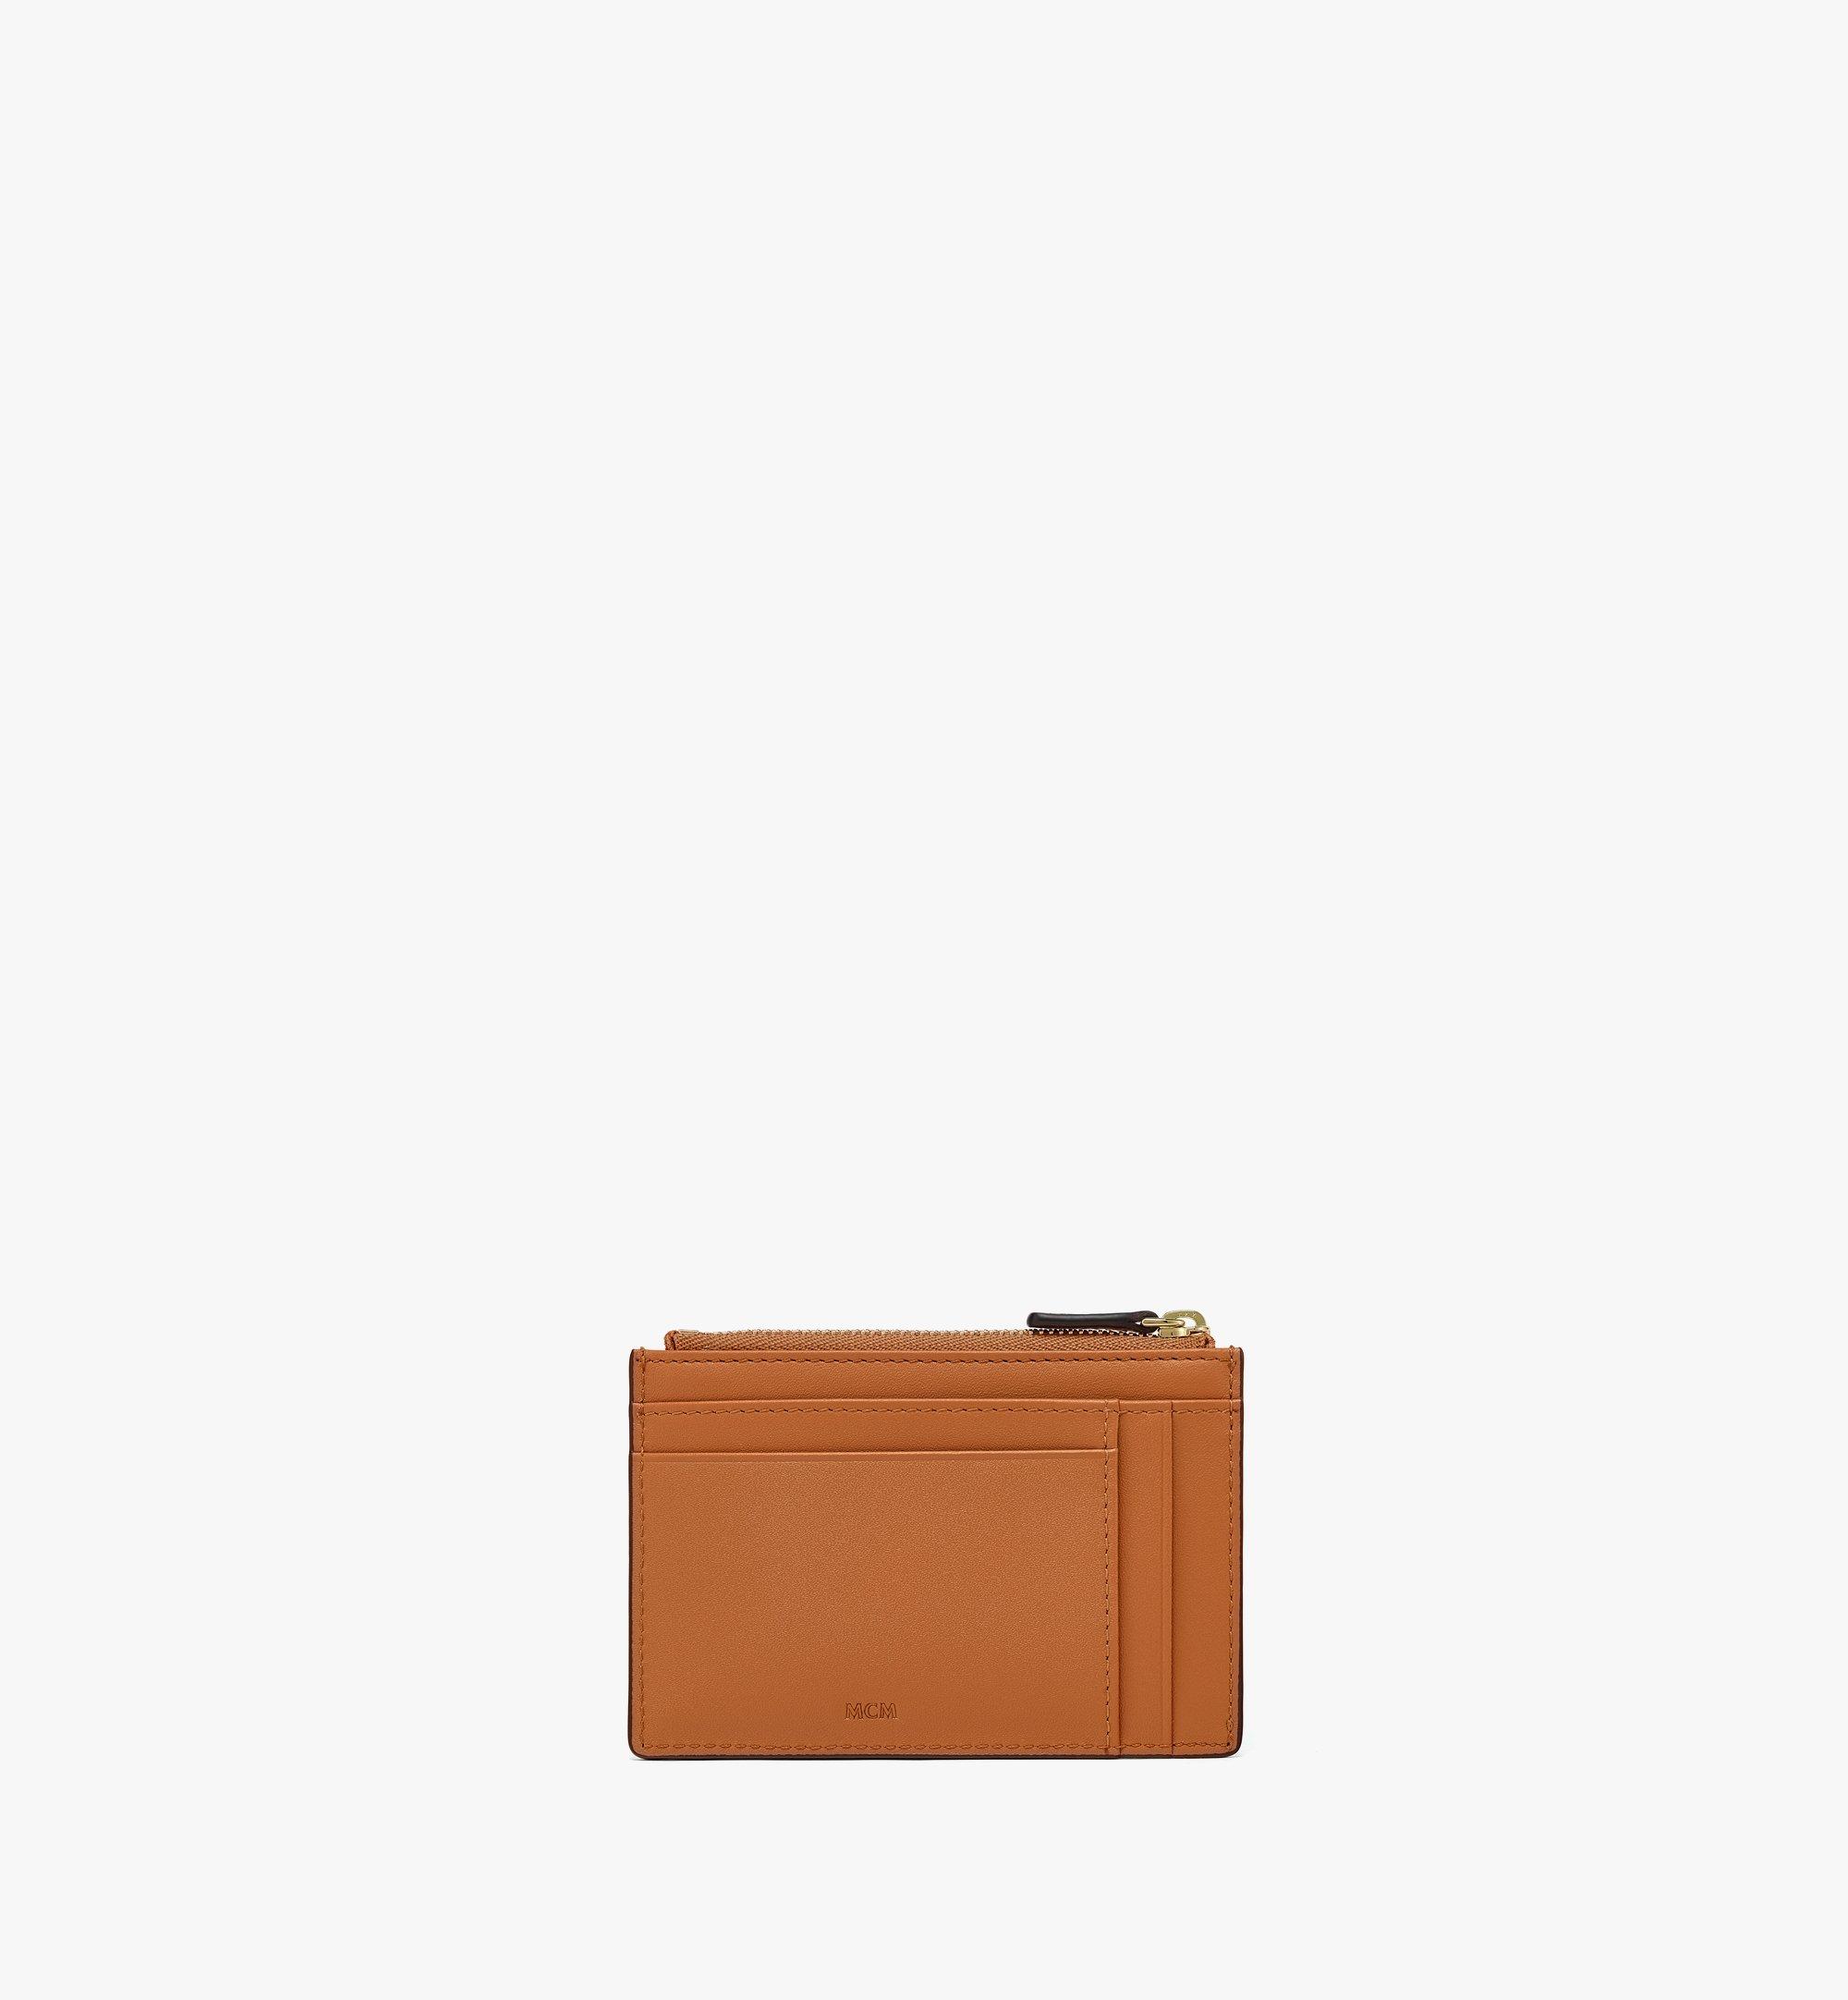 MCM Mode Travia Card Holder in Spanish Nappa Leather Cognac MYADSLD03CO001 Alternate View 2